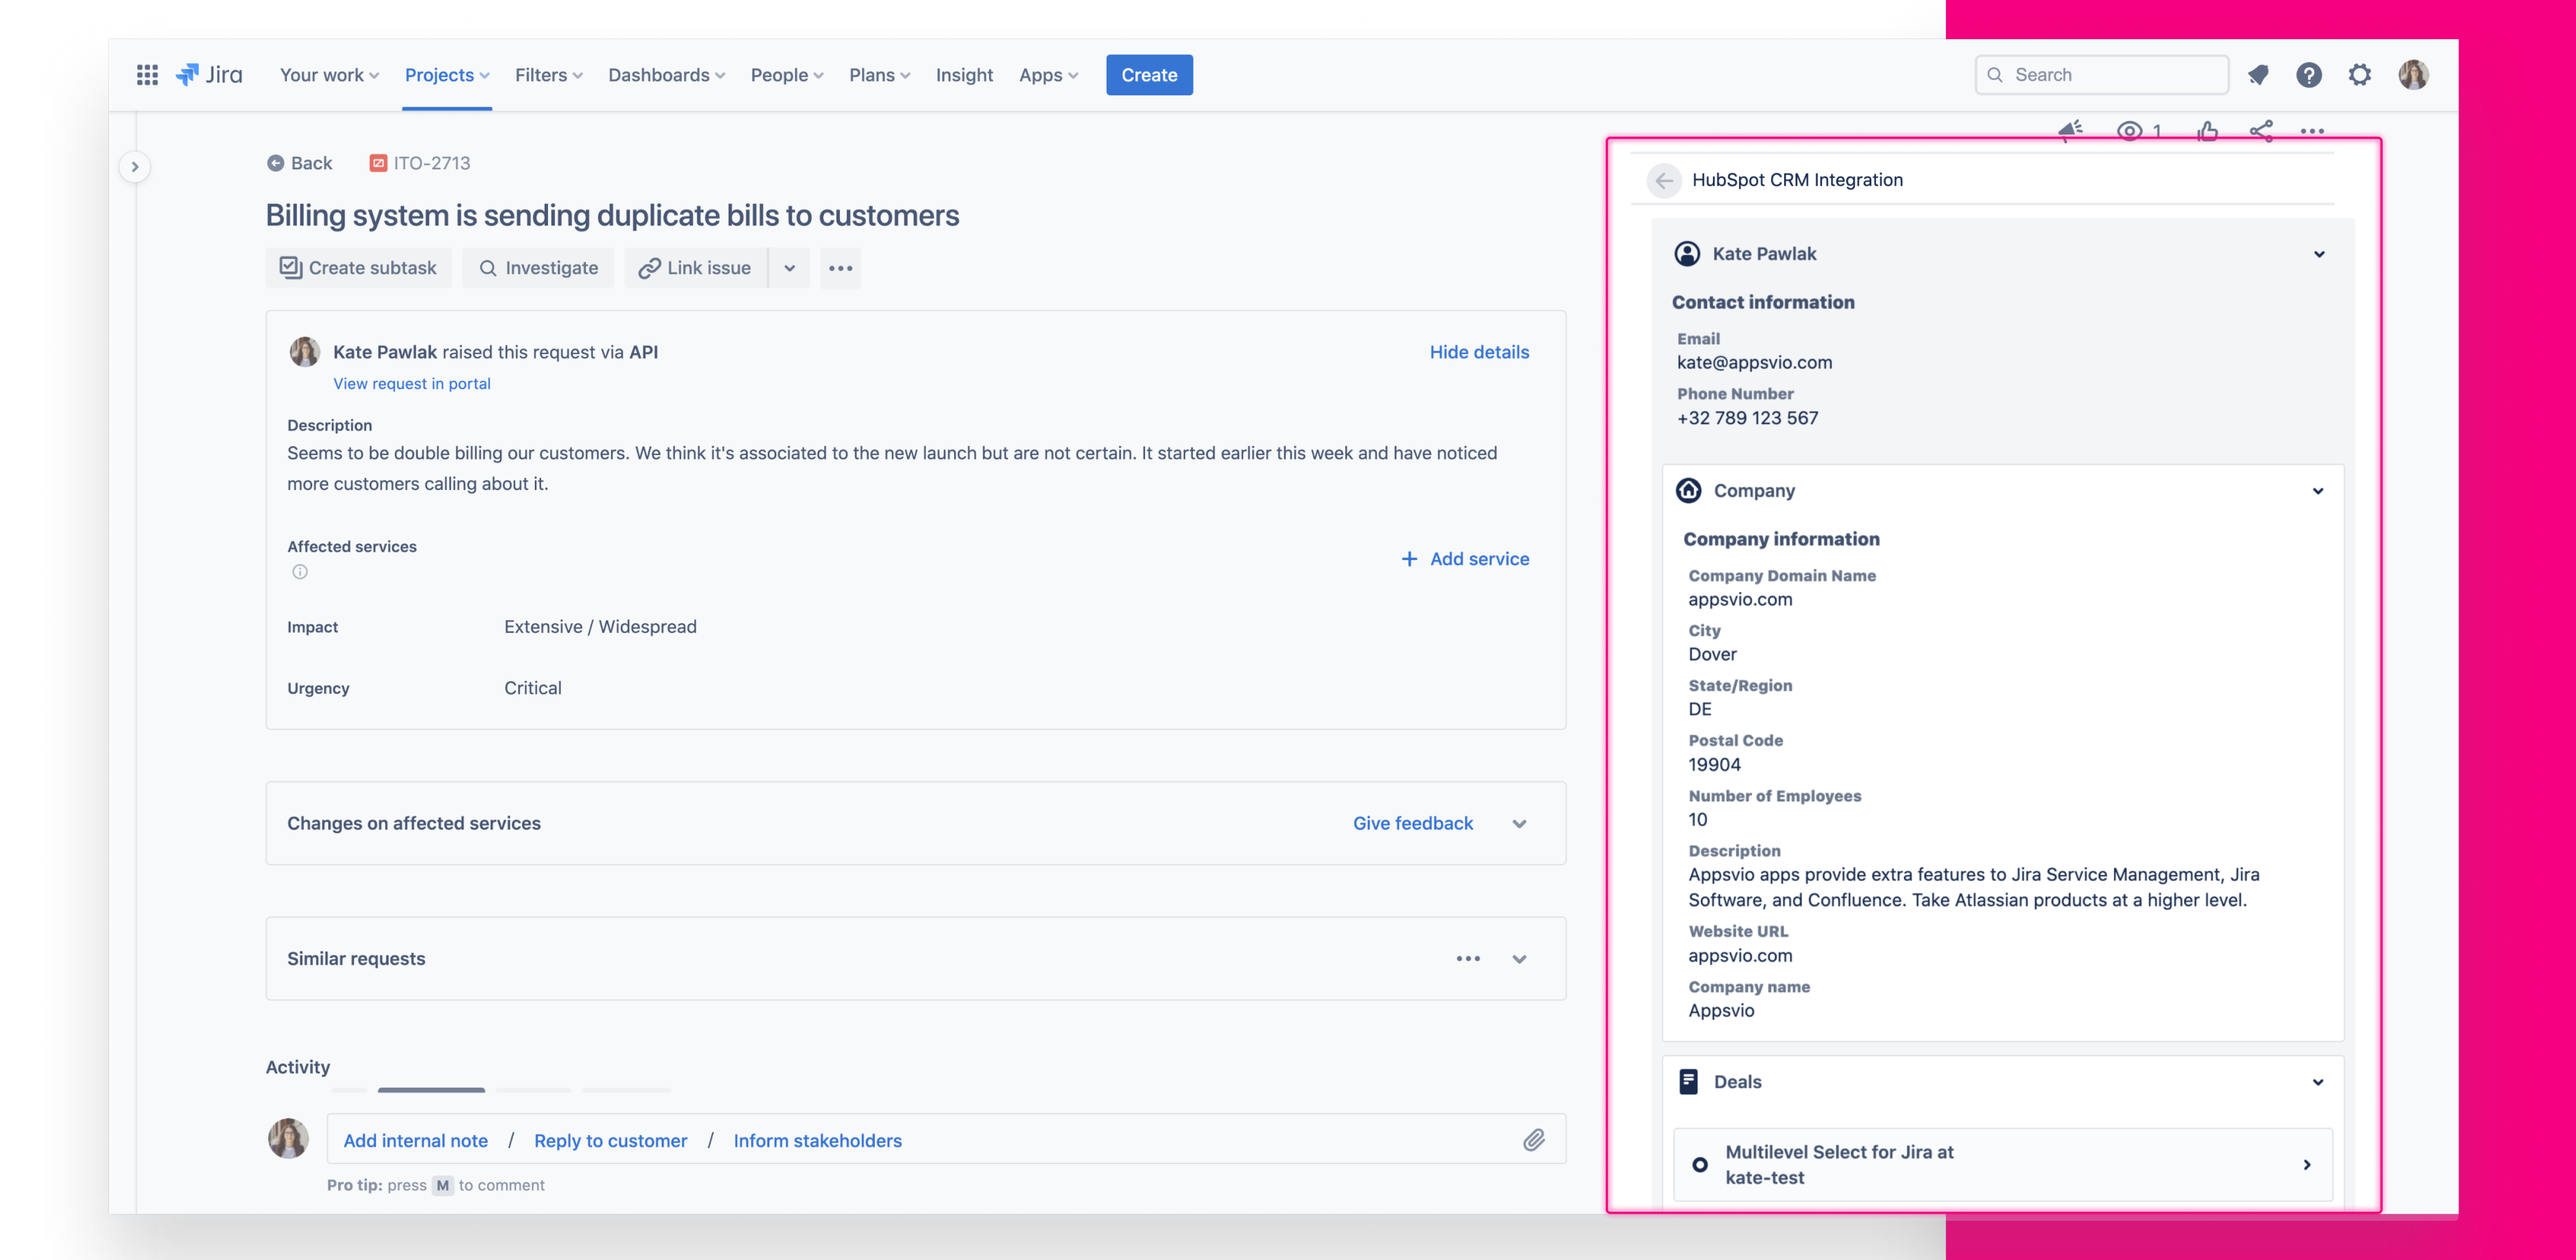 Integrate Jira with HubSpot and enjoy data simultaneously with other Jira’s features. Keep an eye on data and use them even without HubSpot access. It’s you who picks up the user and the details you want to display.